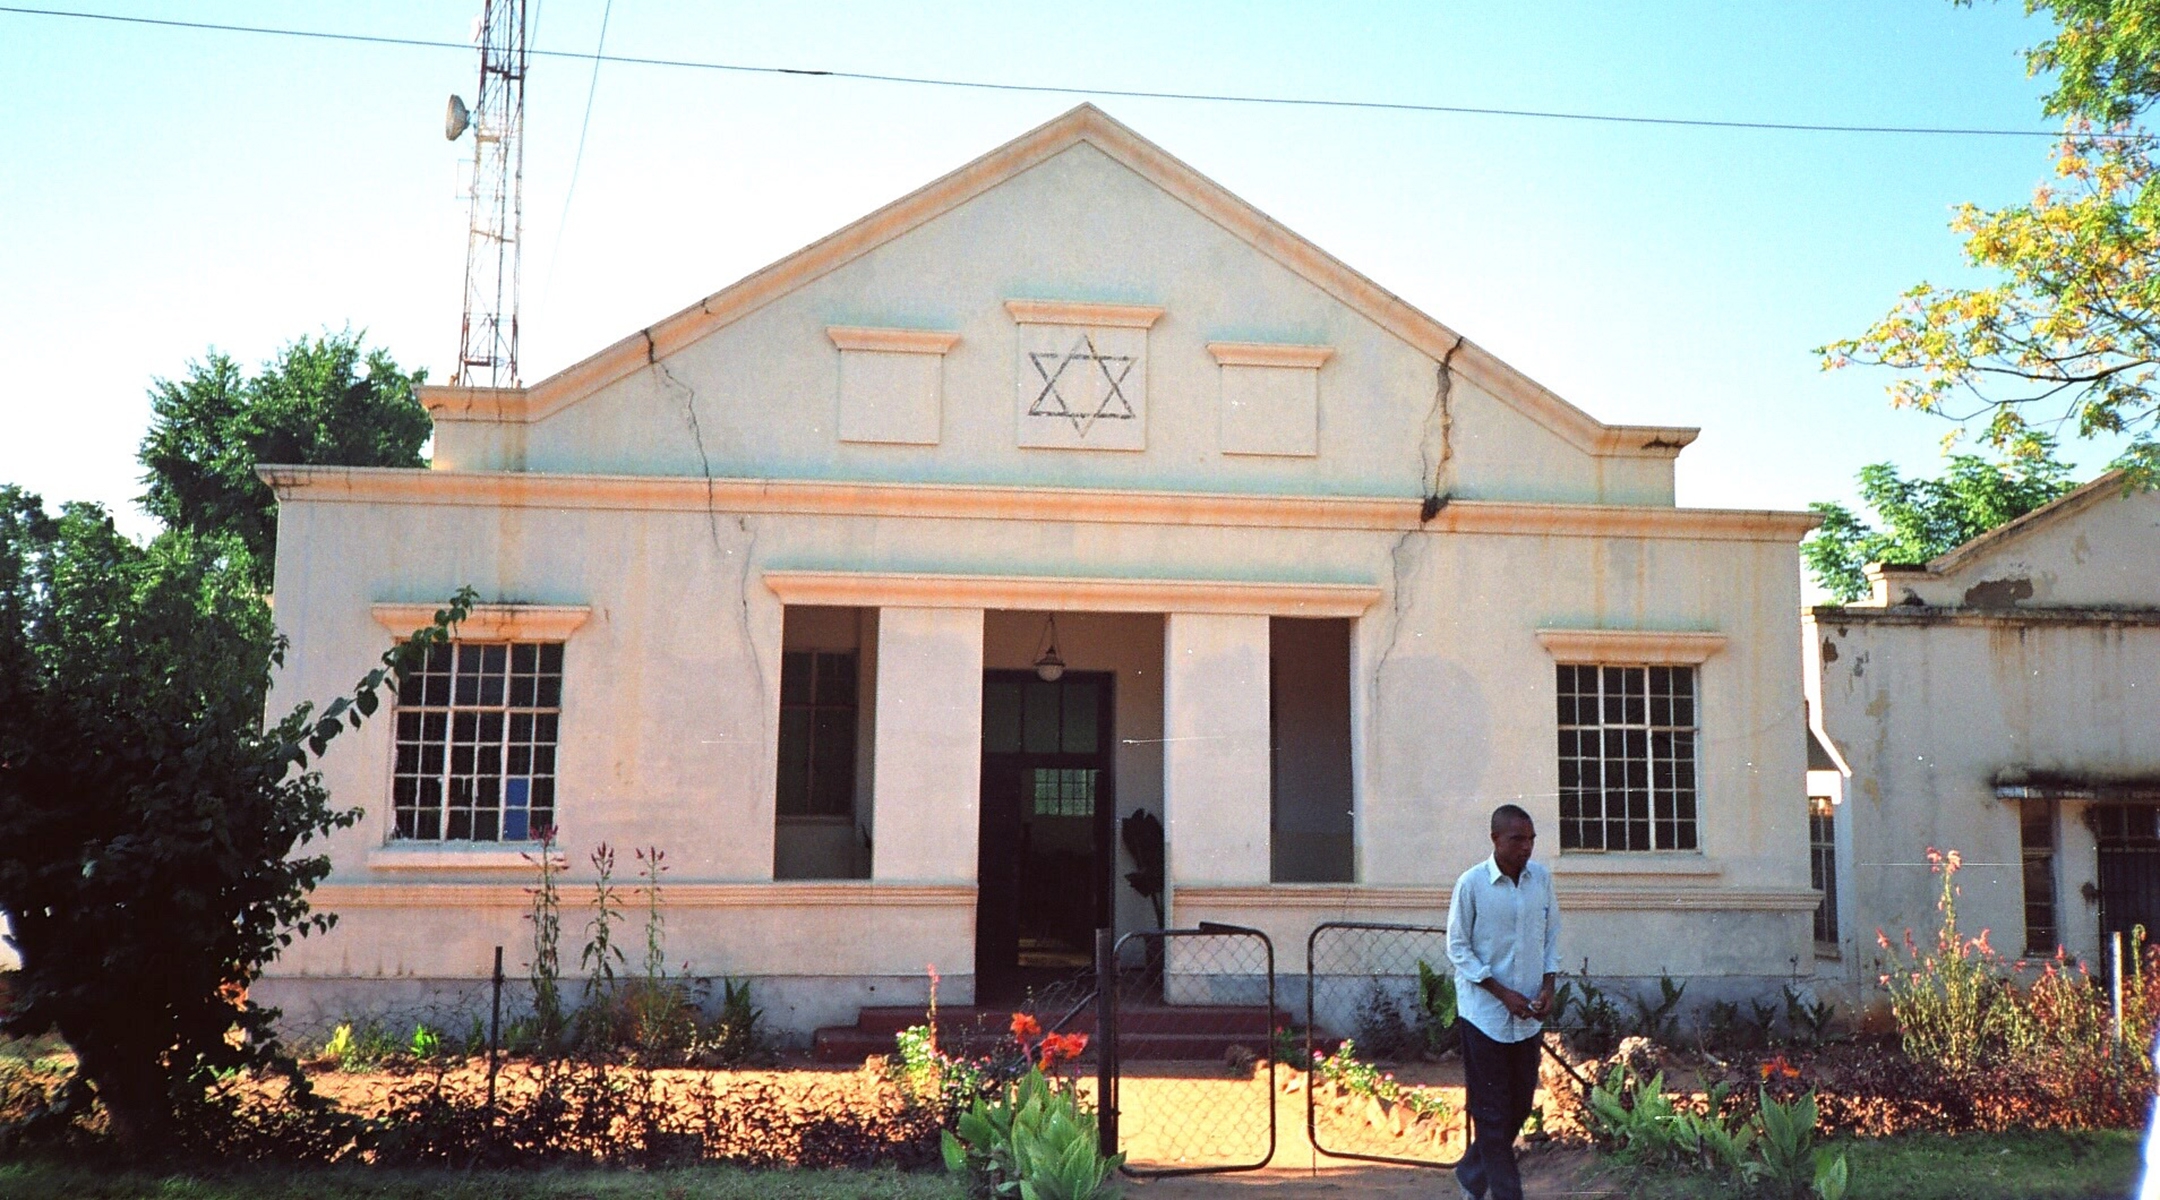 The former synagogue of Livingstone, Zambia, is used today as a church. (Courtesy Rabbi Moshe Silberhaft)